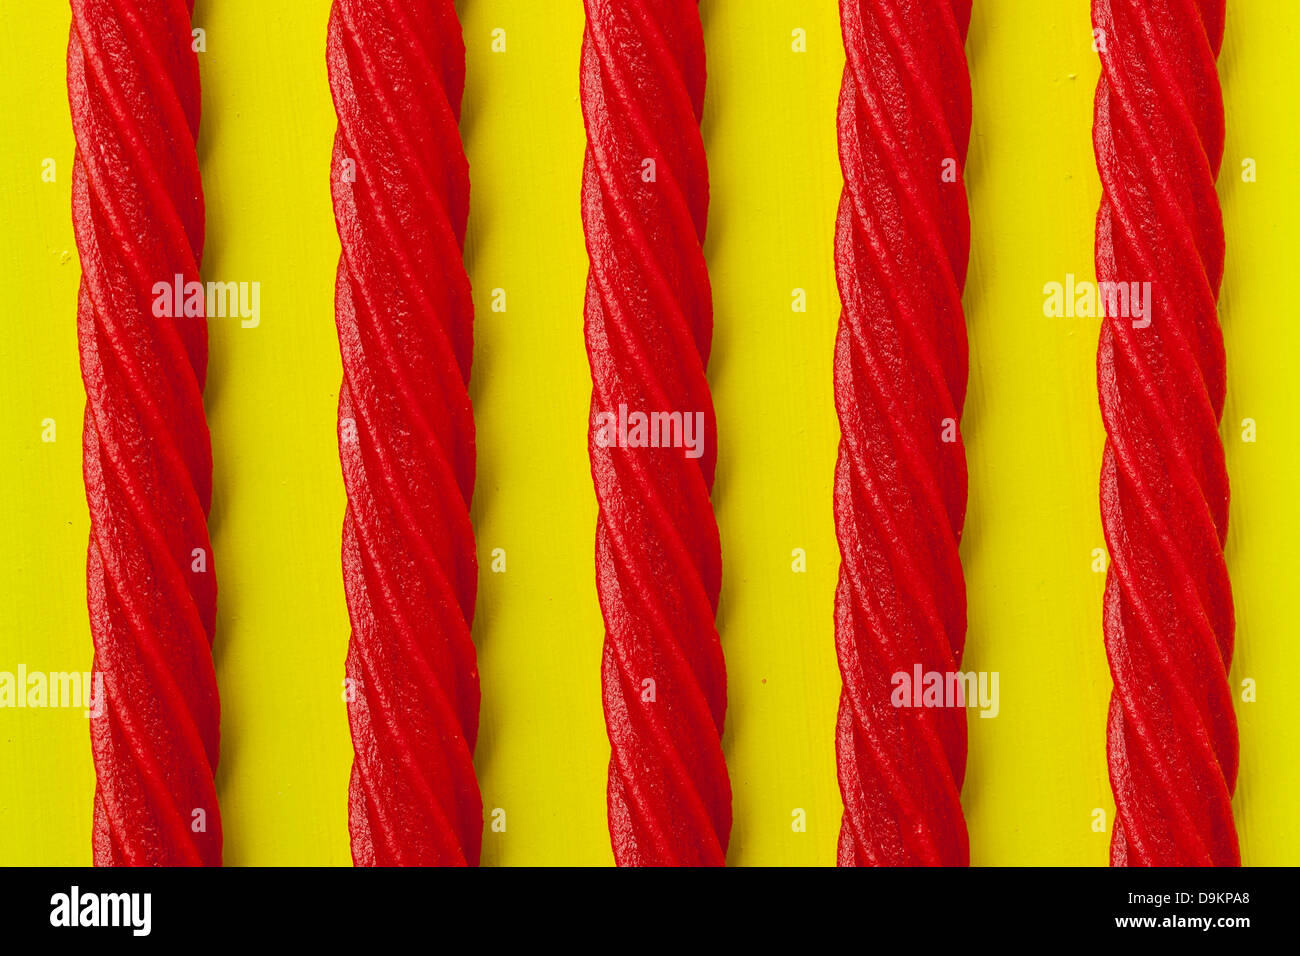 Bright Red Licorice Candy shaped like a twisted rope Stock Photo - Alamy